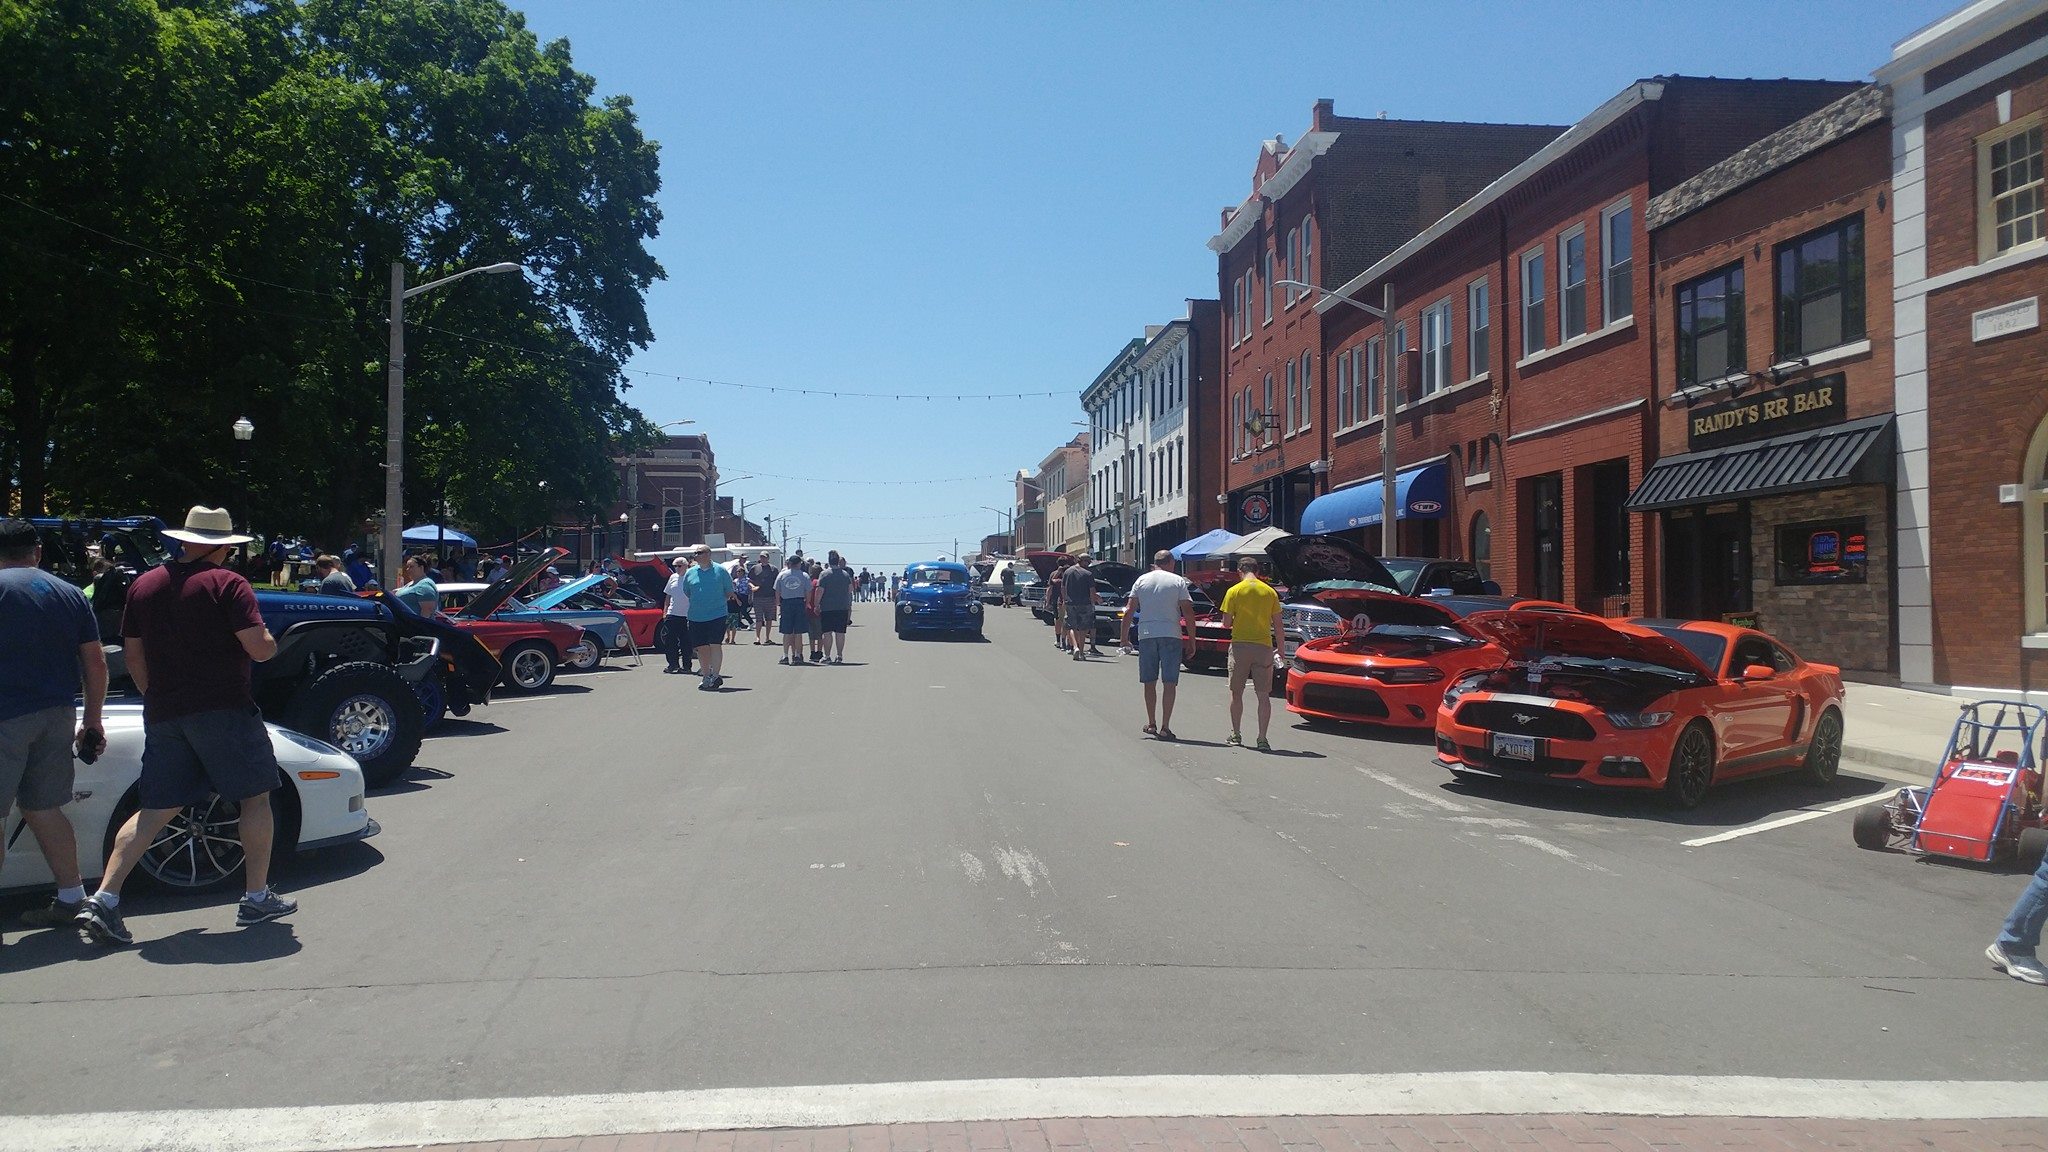 The Optimist Car Show is a favorite annual event.